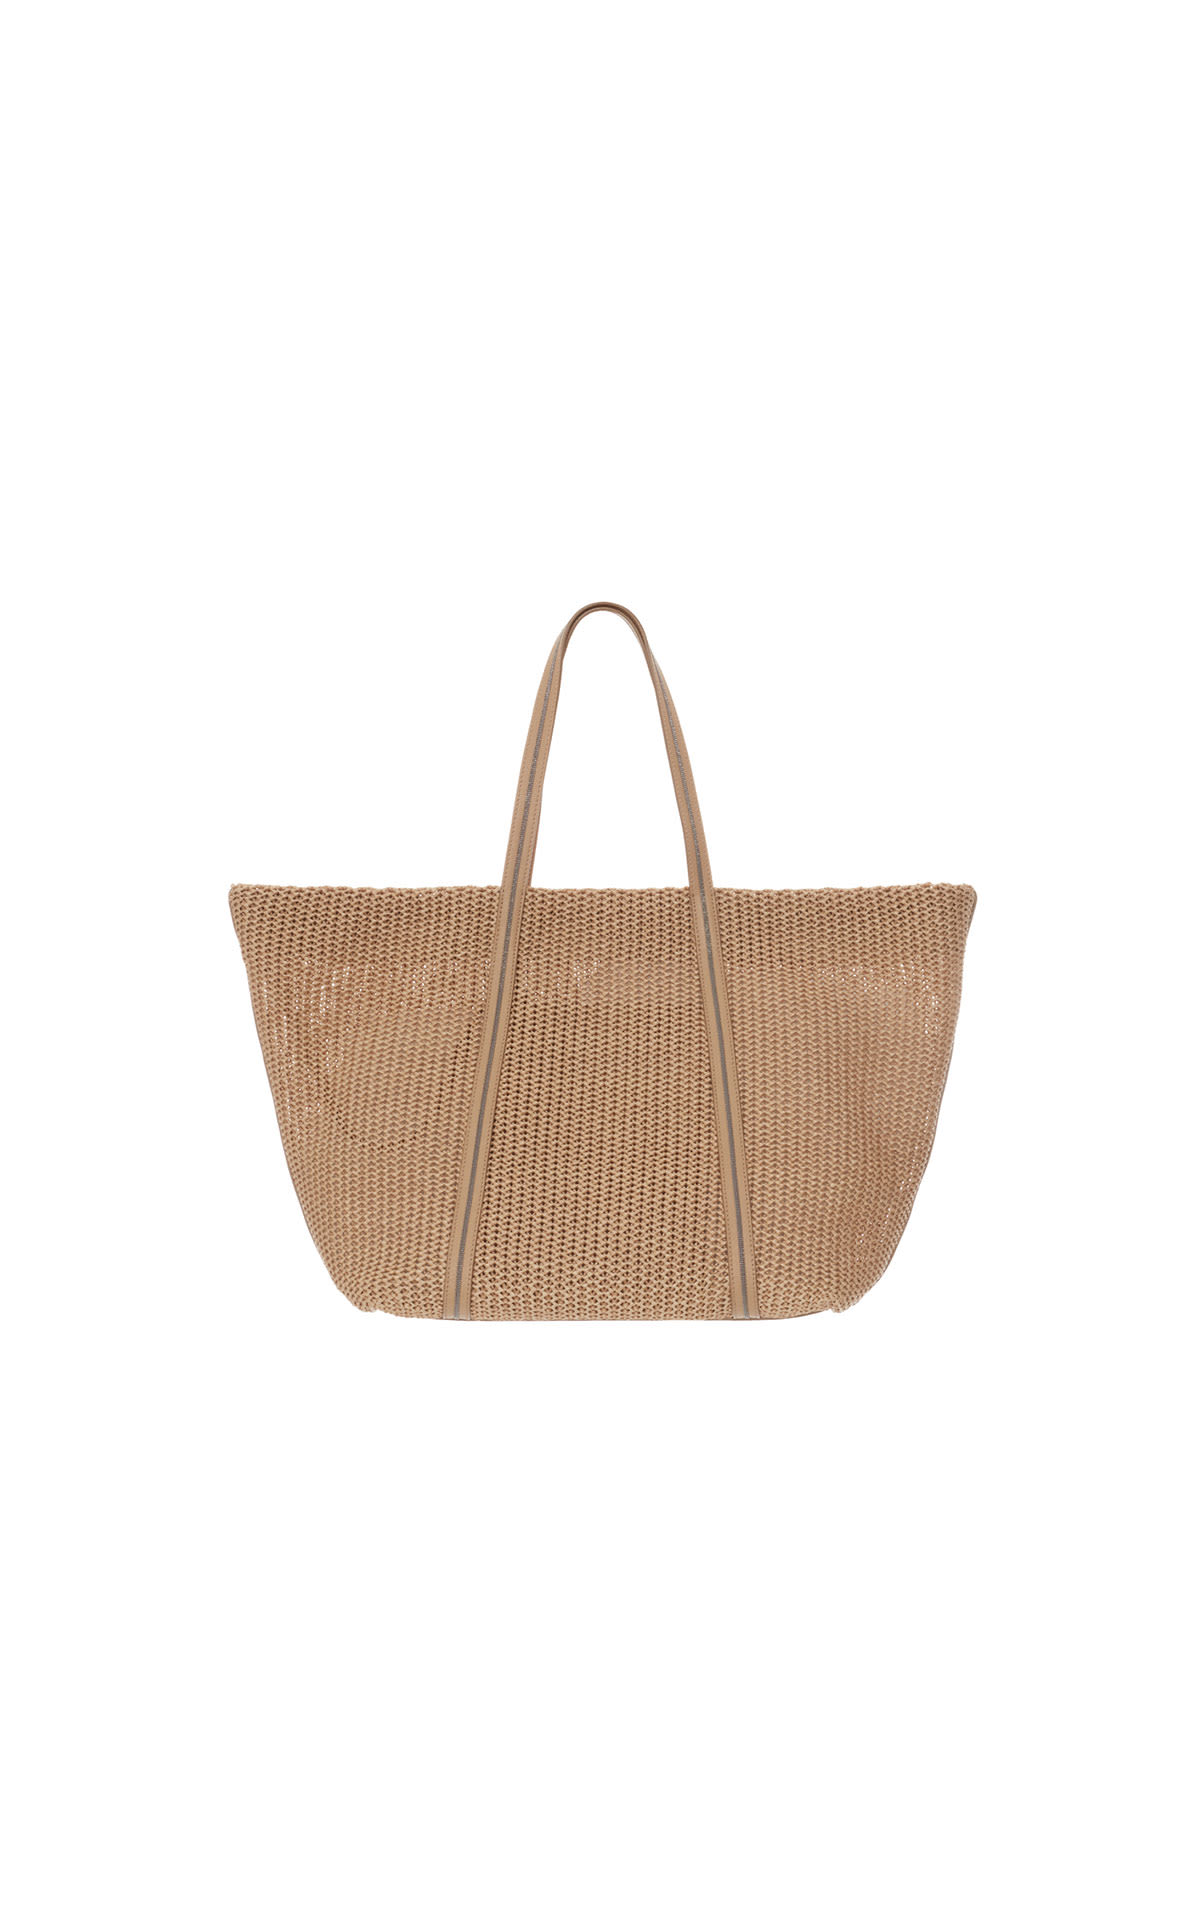 Brunello Cucinelli Straw tote with beaded details from Bicester Village